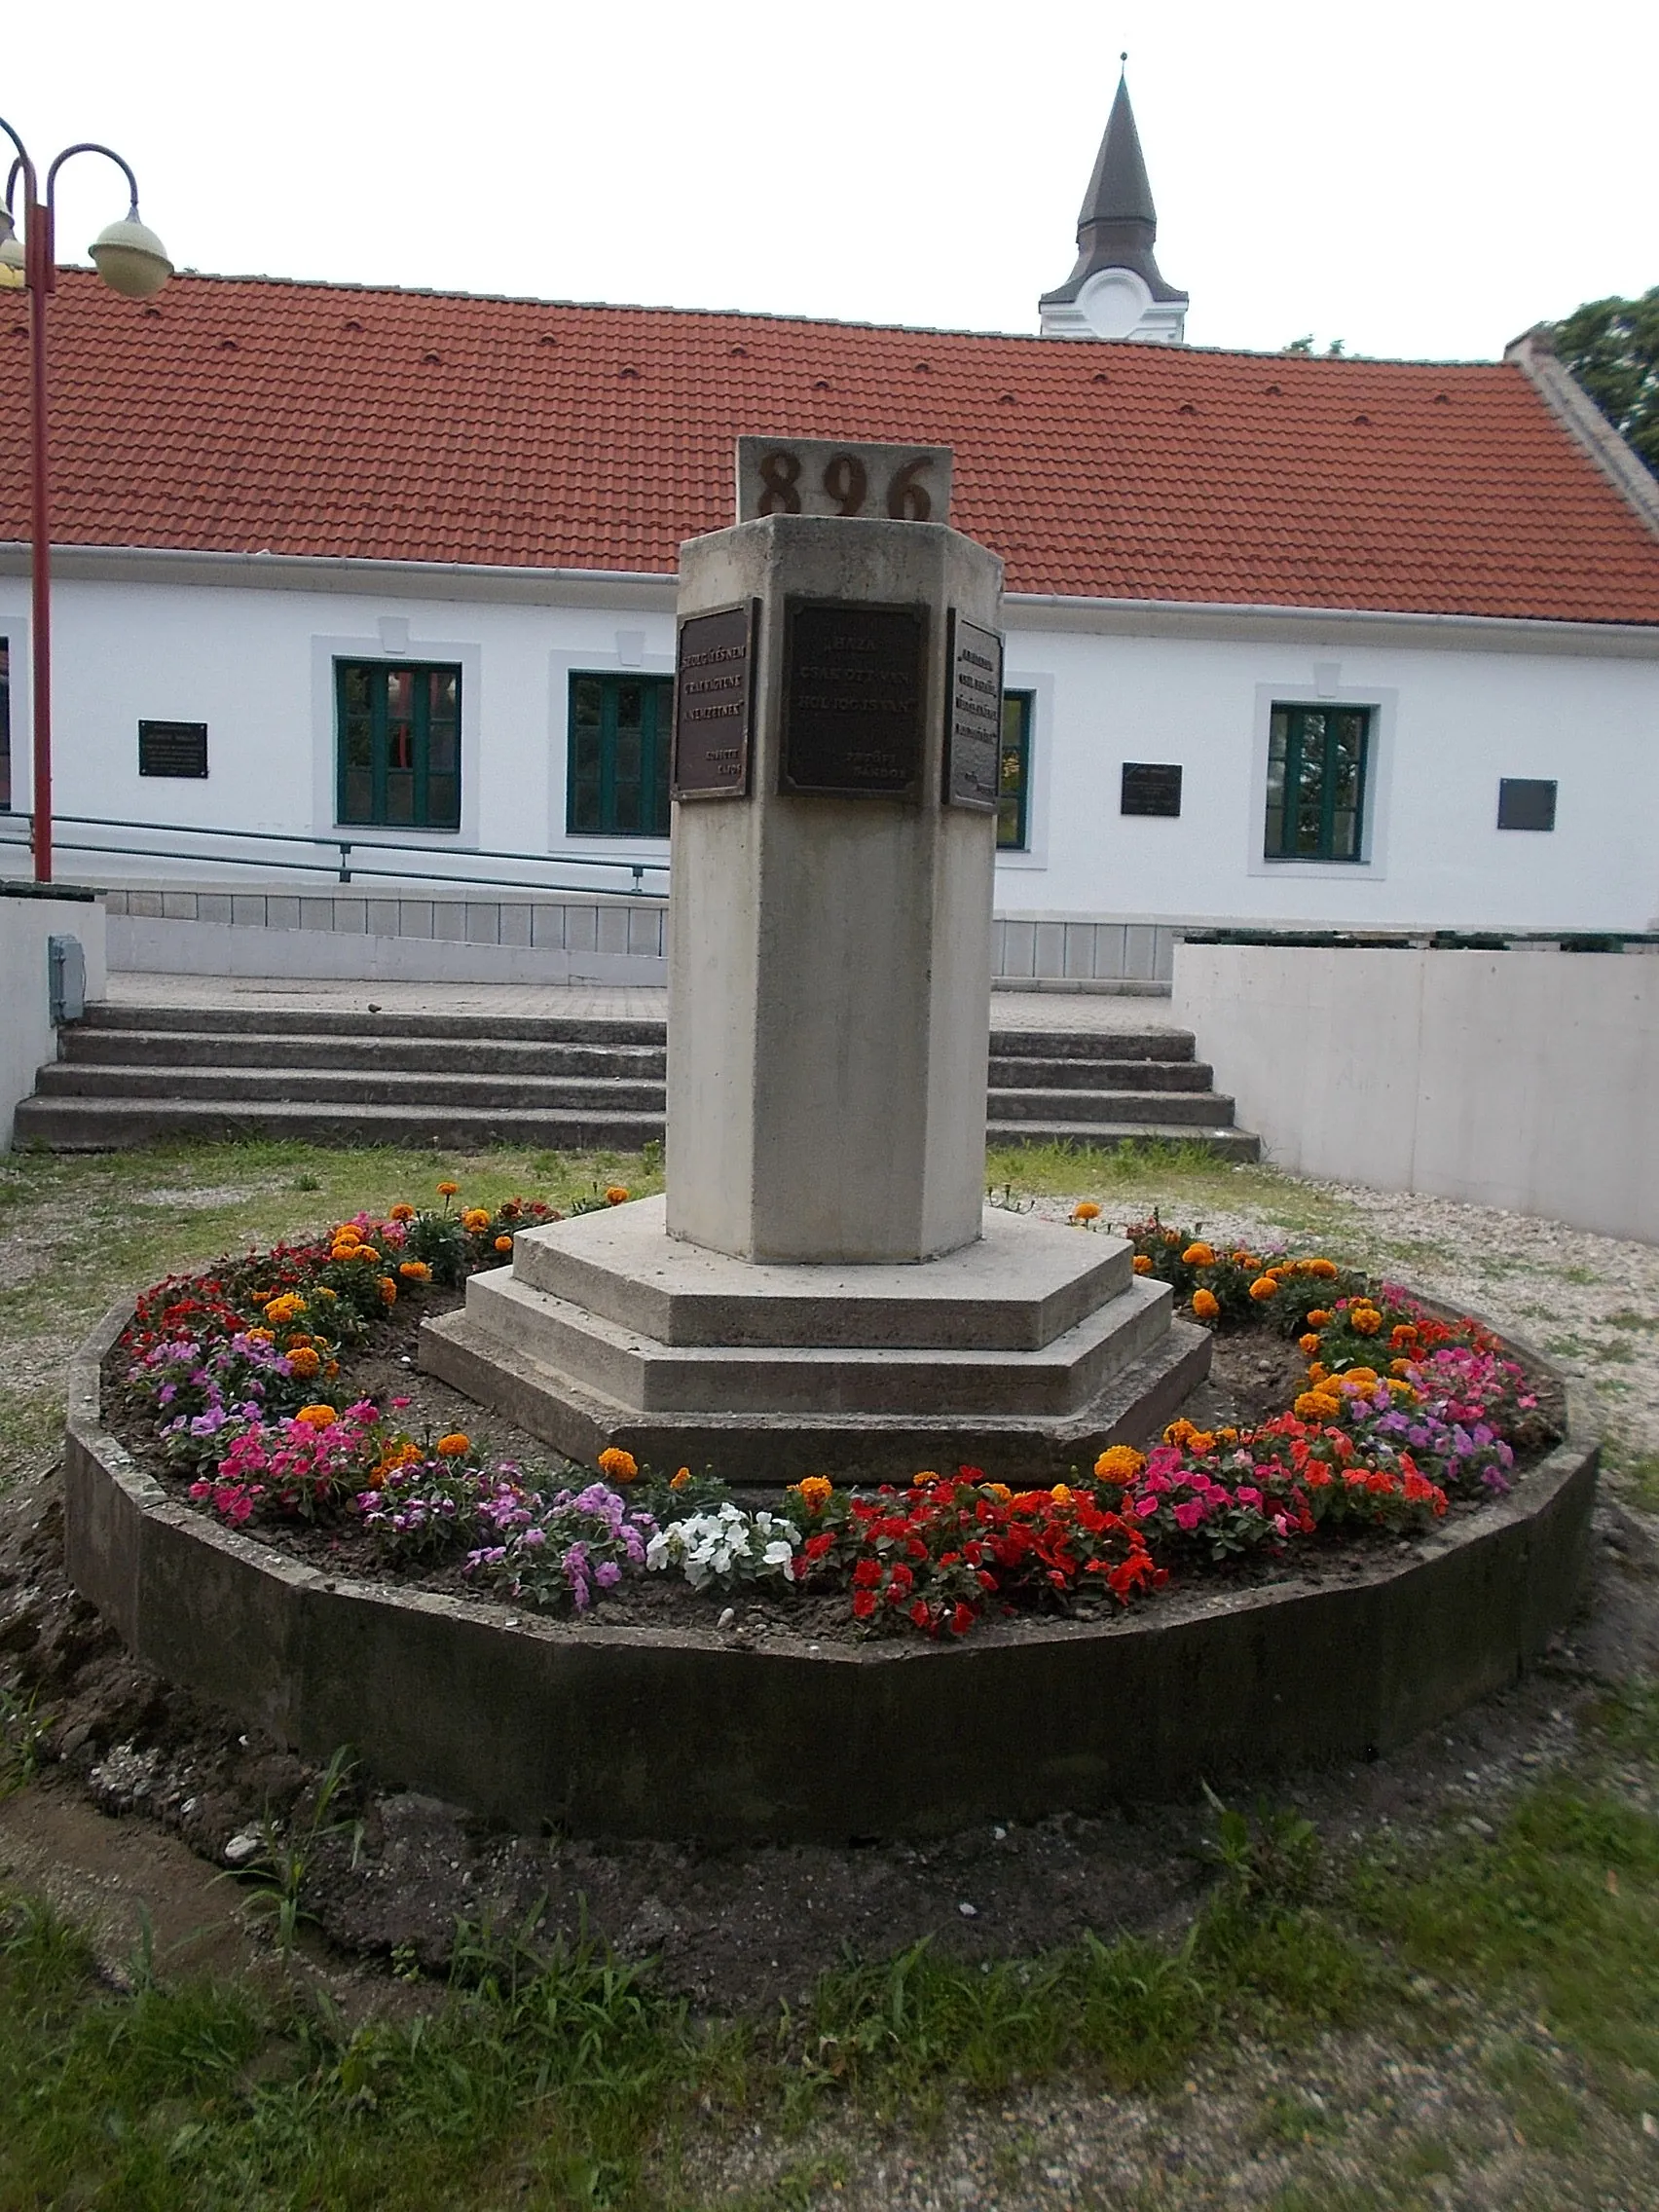 Photo showing: : 1100th Anniversary (Millecentennial?) Monument (or 896 Monument) (1996 works, hexagonal stone? column with six bronze plaques with quote, and big 896 number on the top refer to the date of the Hungarian conquest) - Borsos Miklós park, Templomdomb (~Church hill), Ajka, Veszprém County, Hungary.